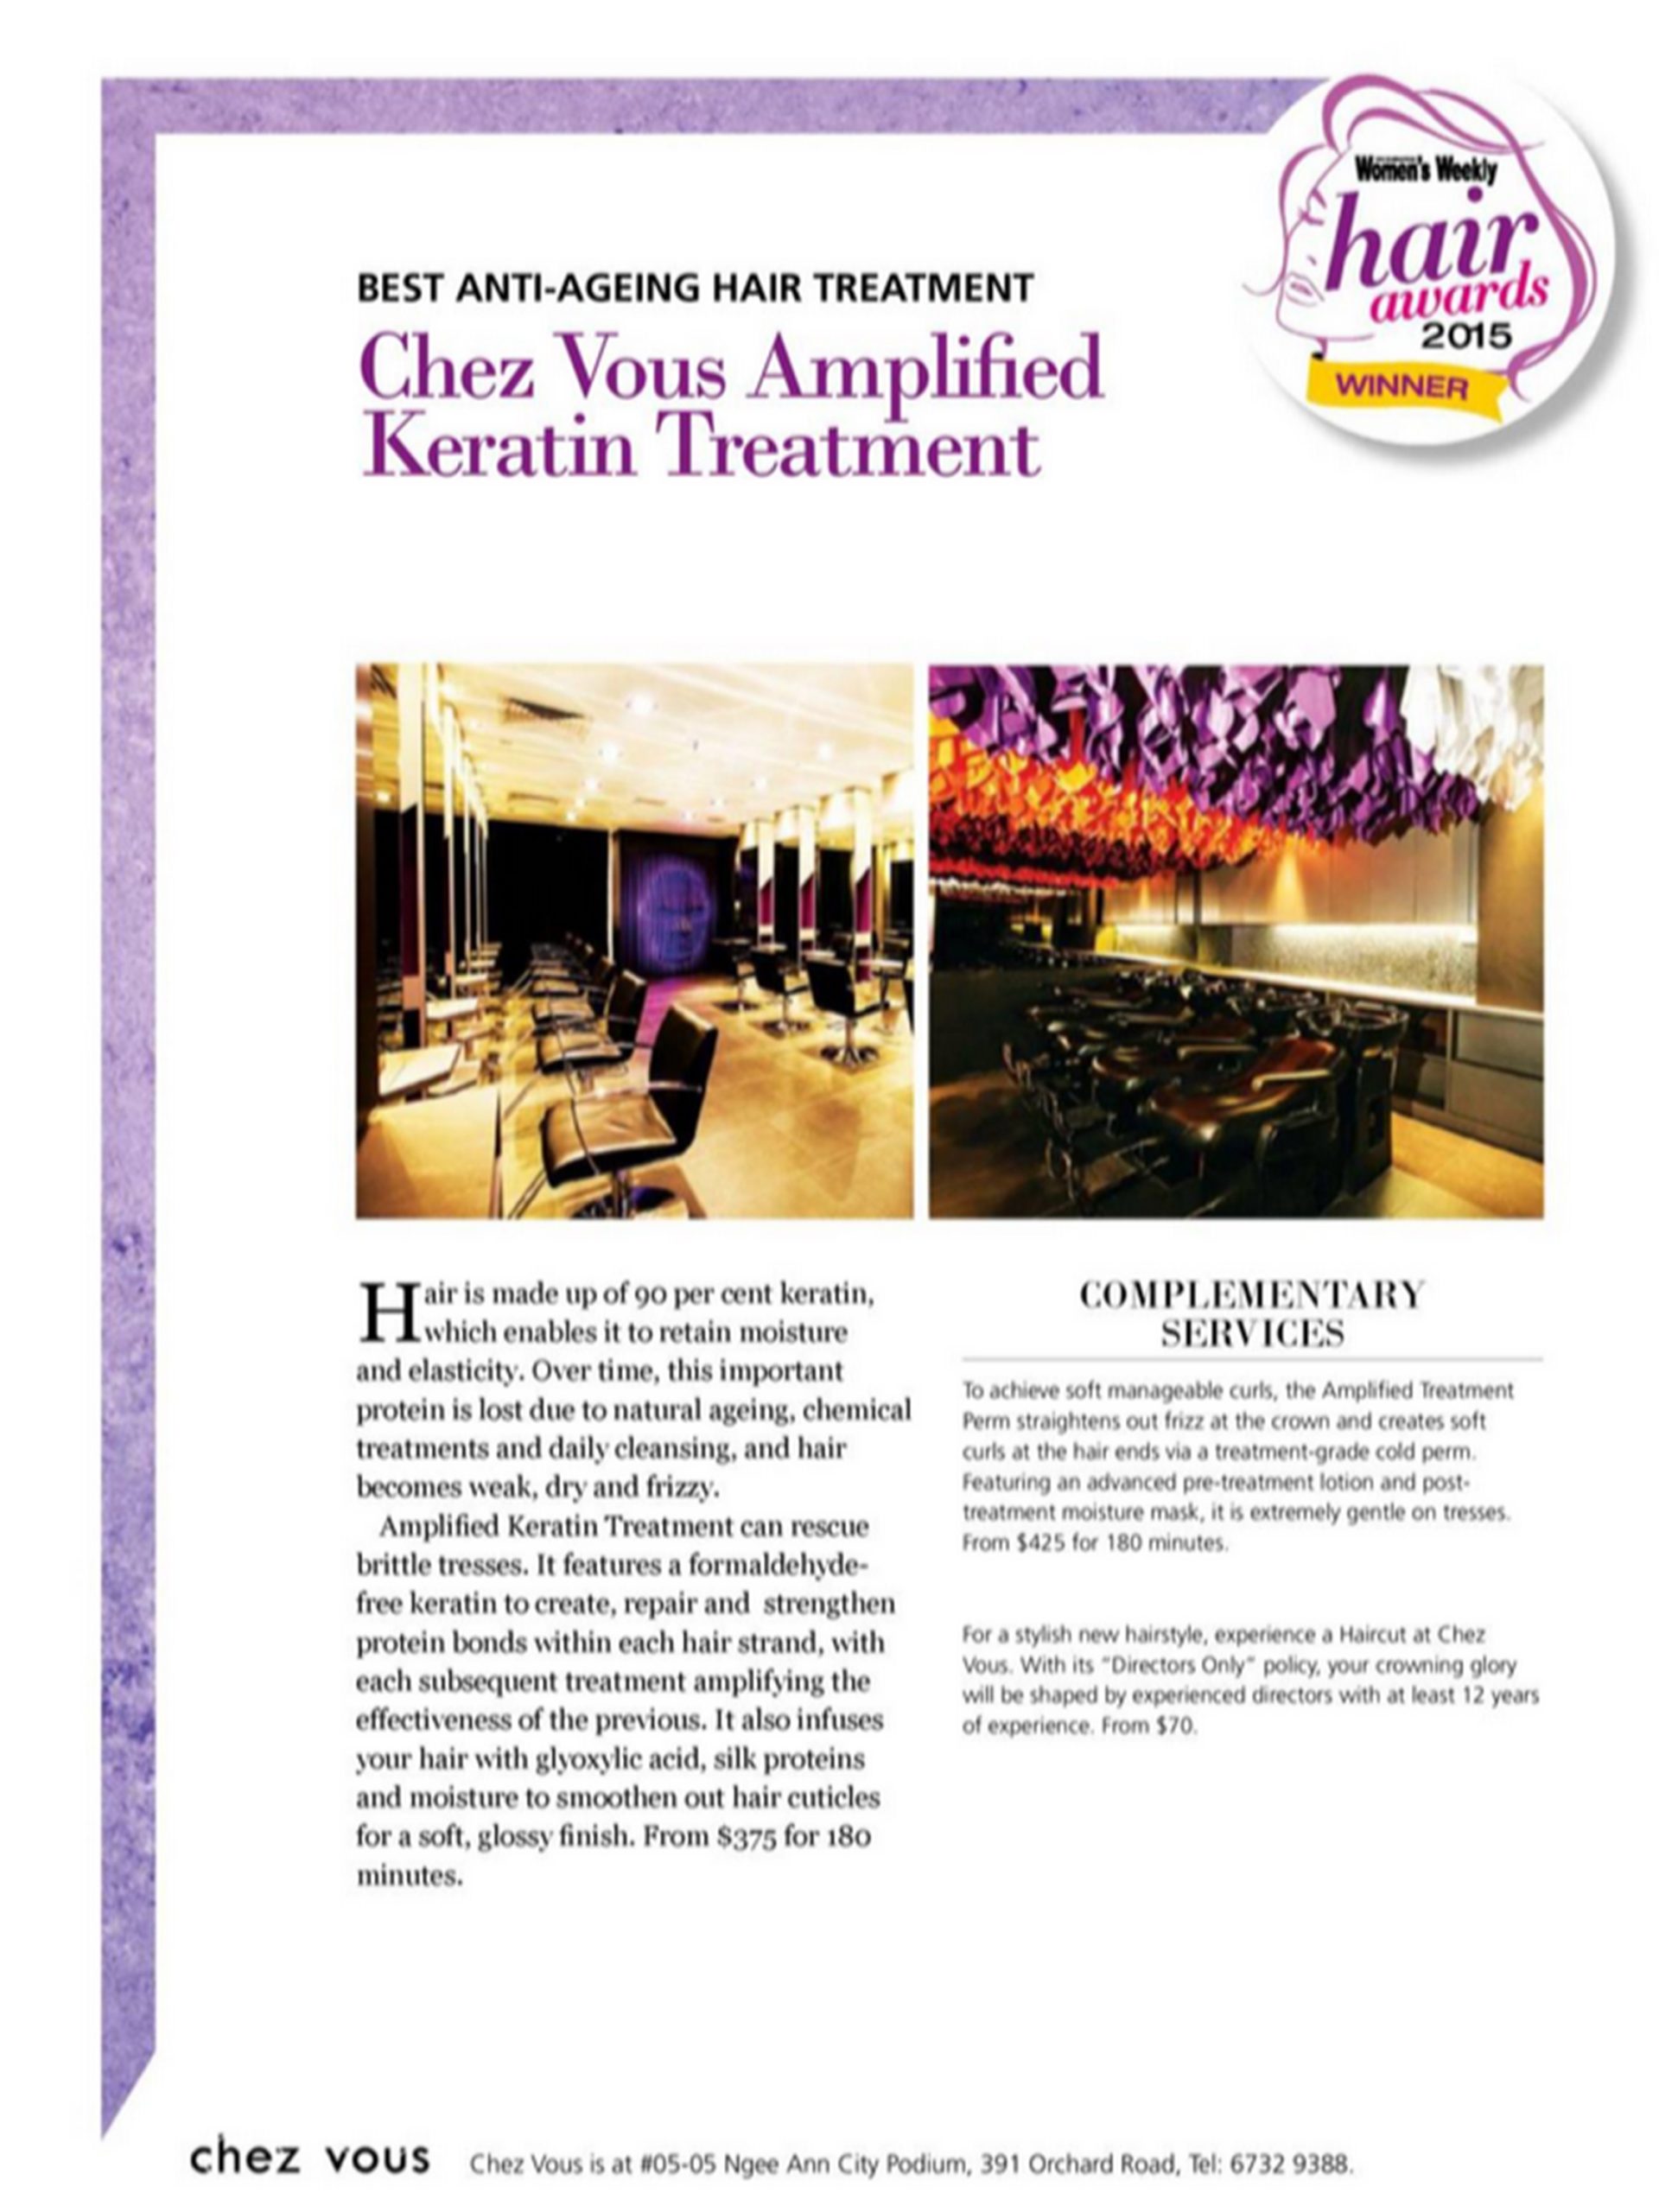 Chez Vous Salon: Best Anti Ageing Hair Treatment for our Signature Amplified Keratin Treatment | The Singapore Women's Weekly Hair Awards